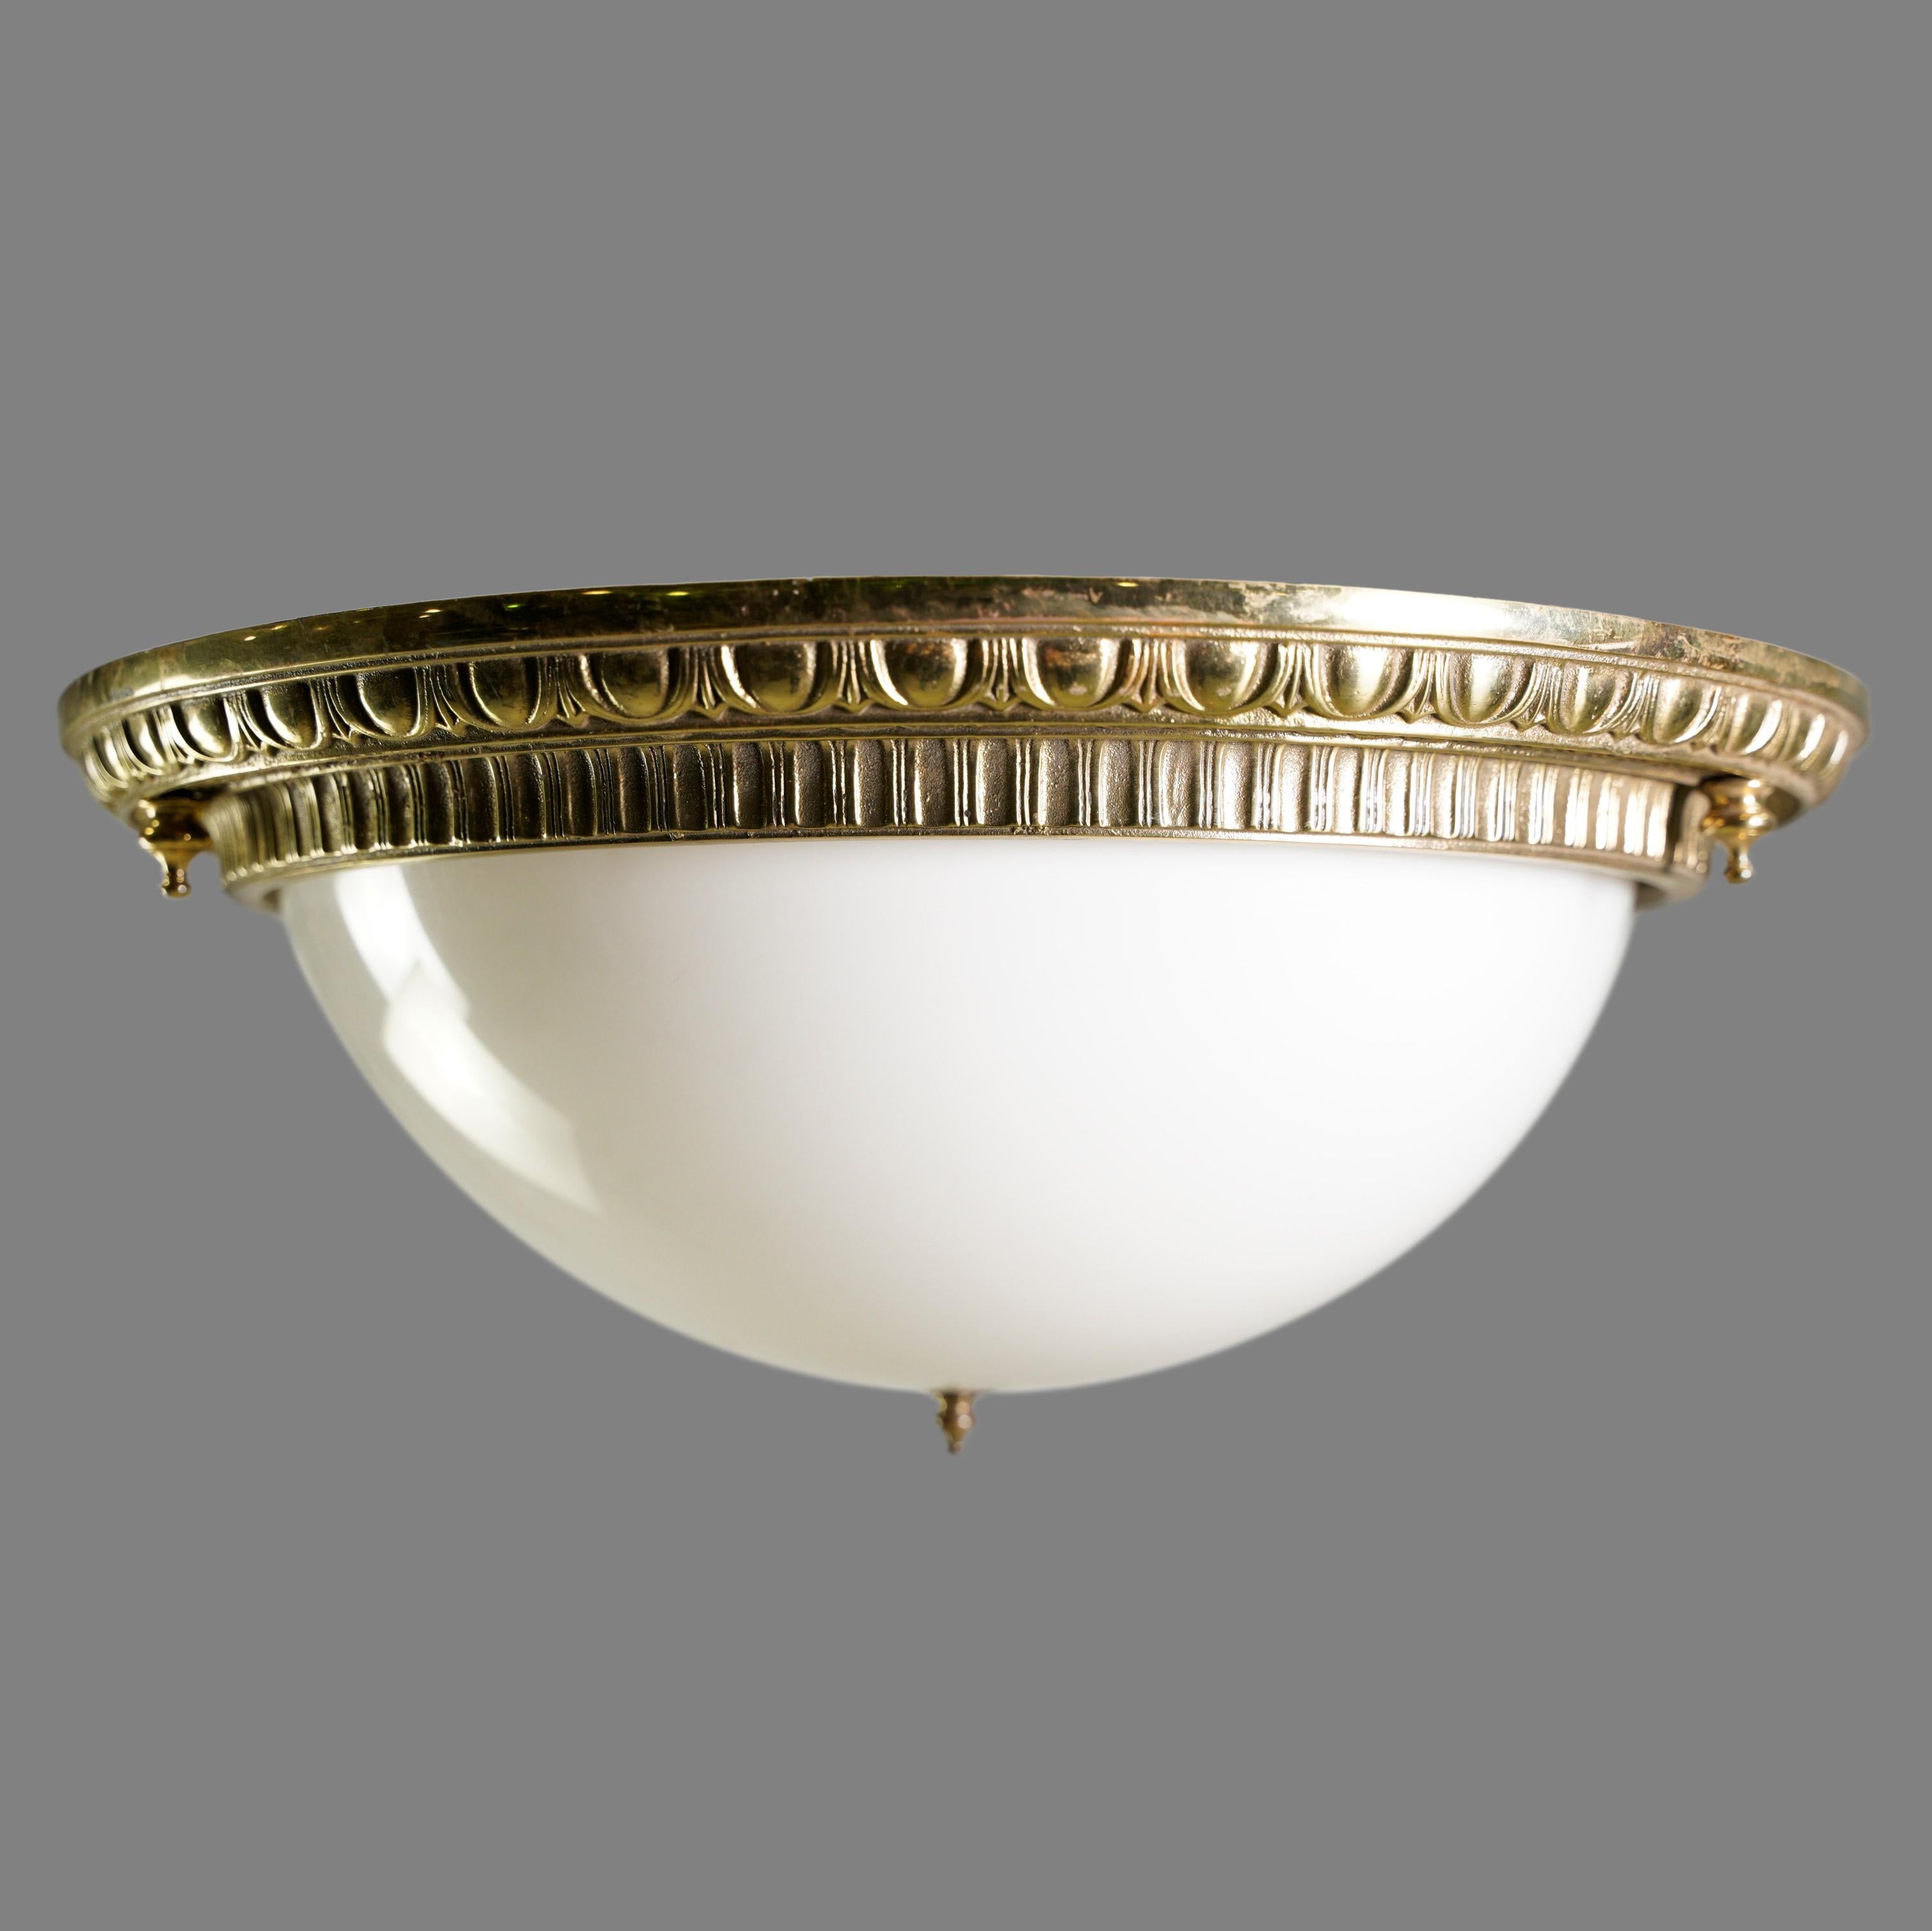 20th century Cast bronze flush mount done in a Classic Greek egg and dart design. The shade is white glass. Cleaned and restored. Please note, this item is located in our Scranton, PA location.